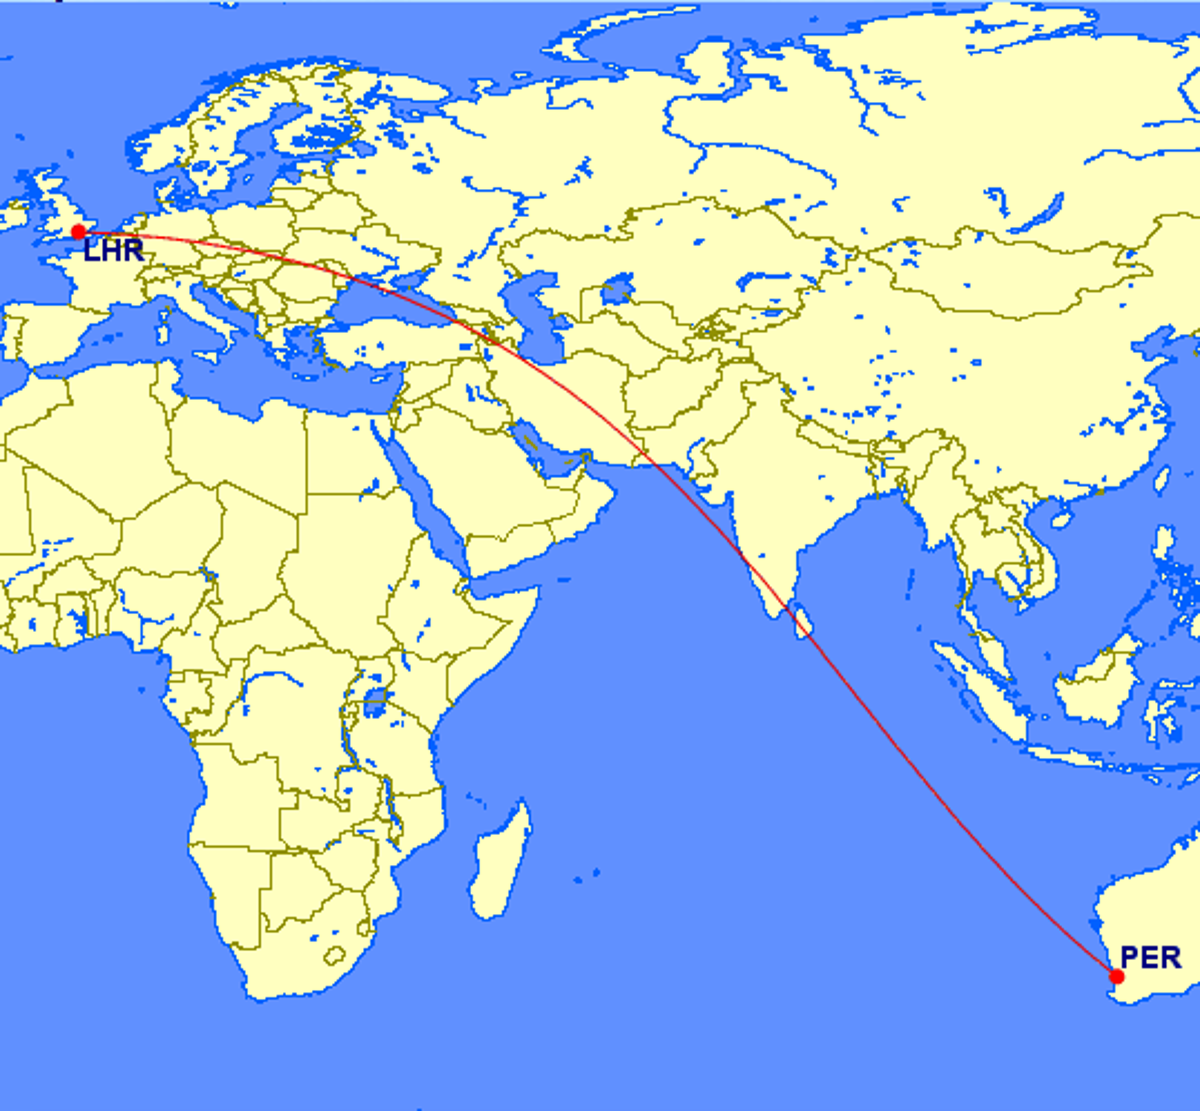 How long would it take to fly to Australia from UK?